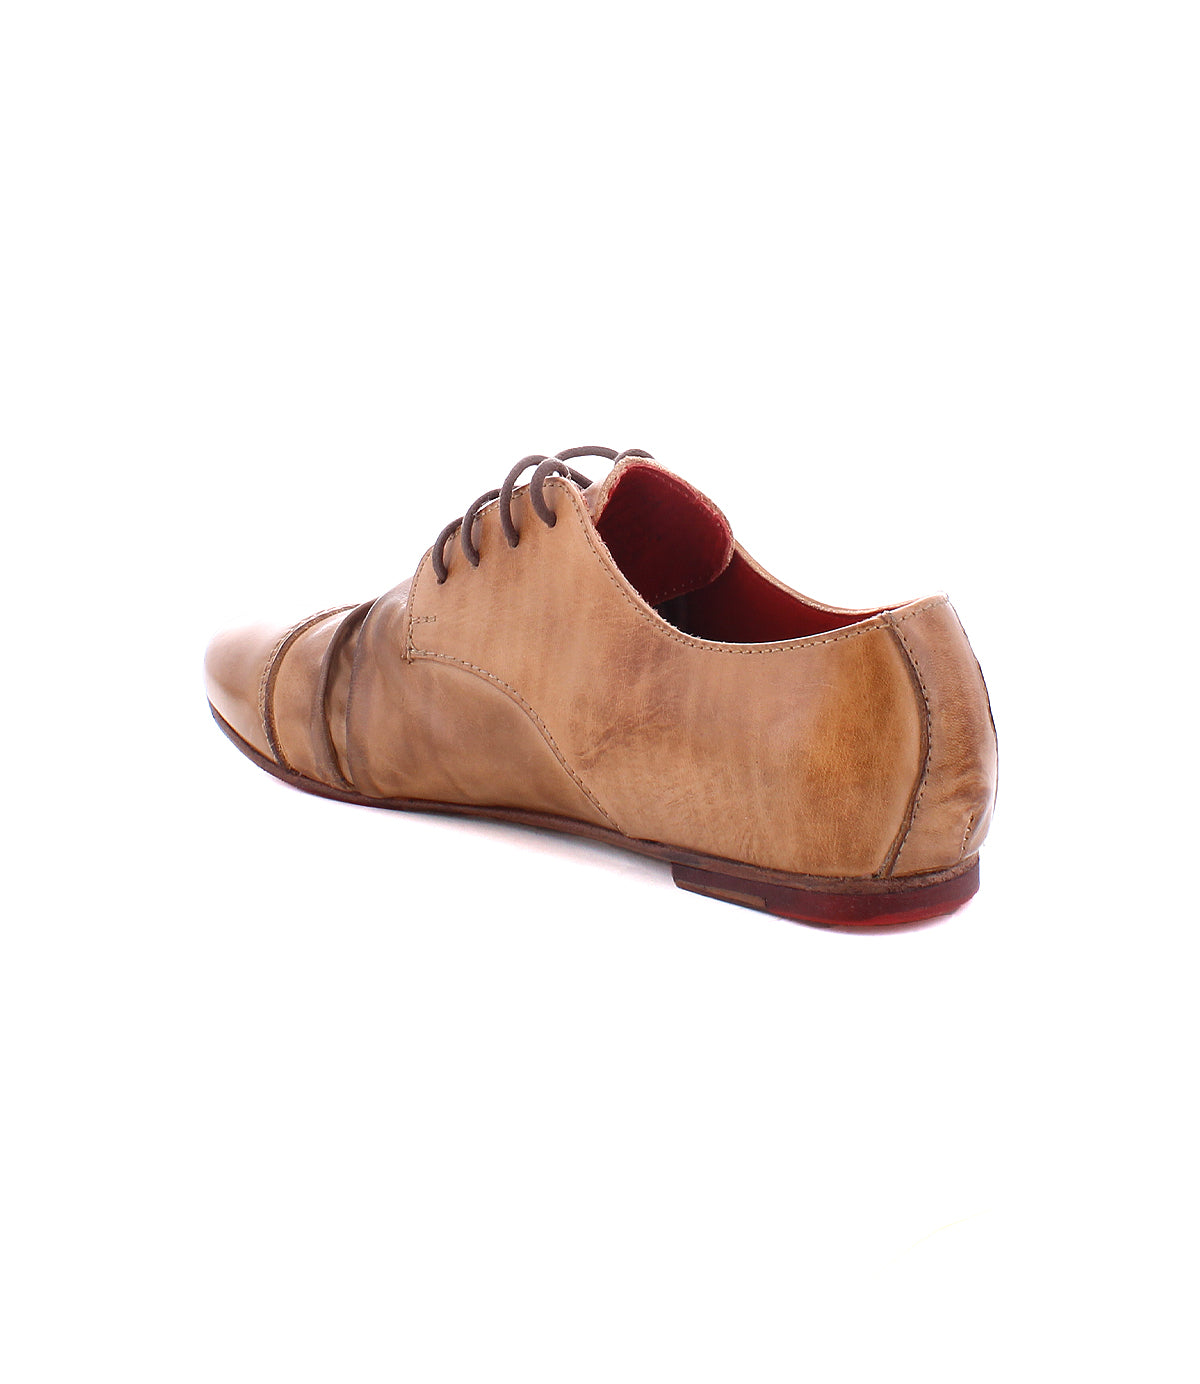 A light brown, worn leather oxford shoe with a 1920s wingtip flair and laces, shown from the back-right angle against a white background. The shoe is the Rumba II by Bed Stu.